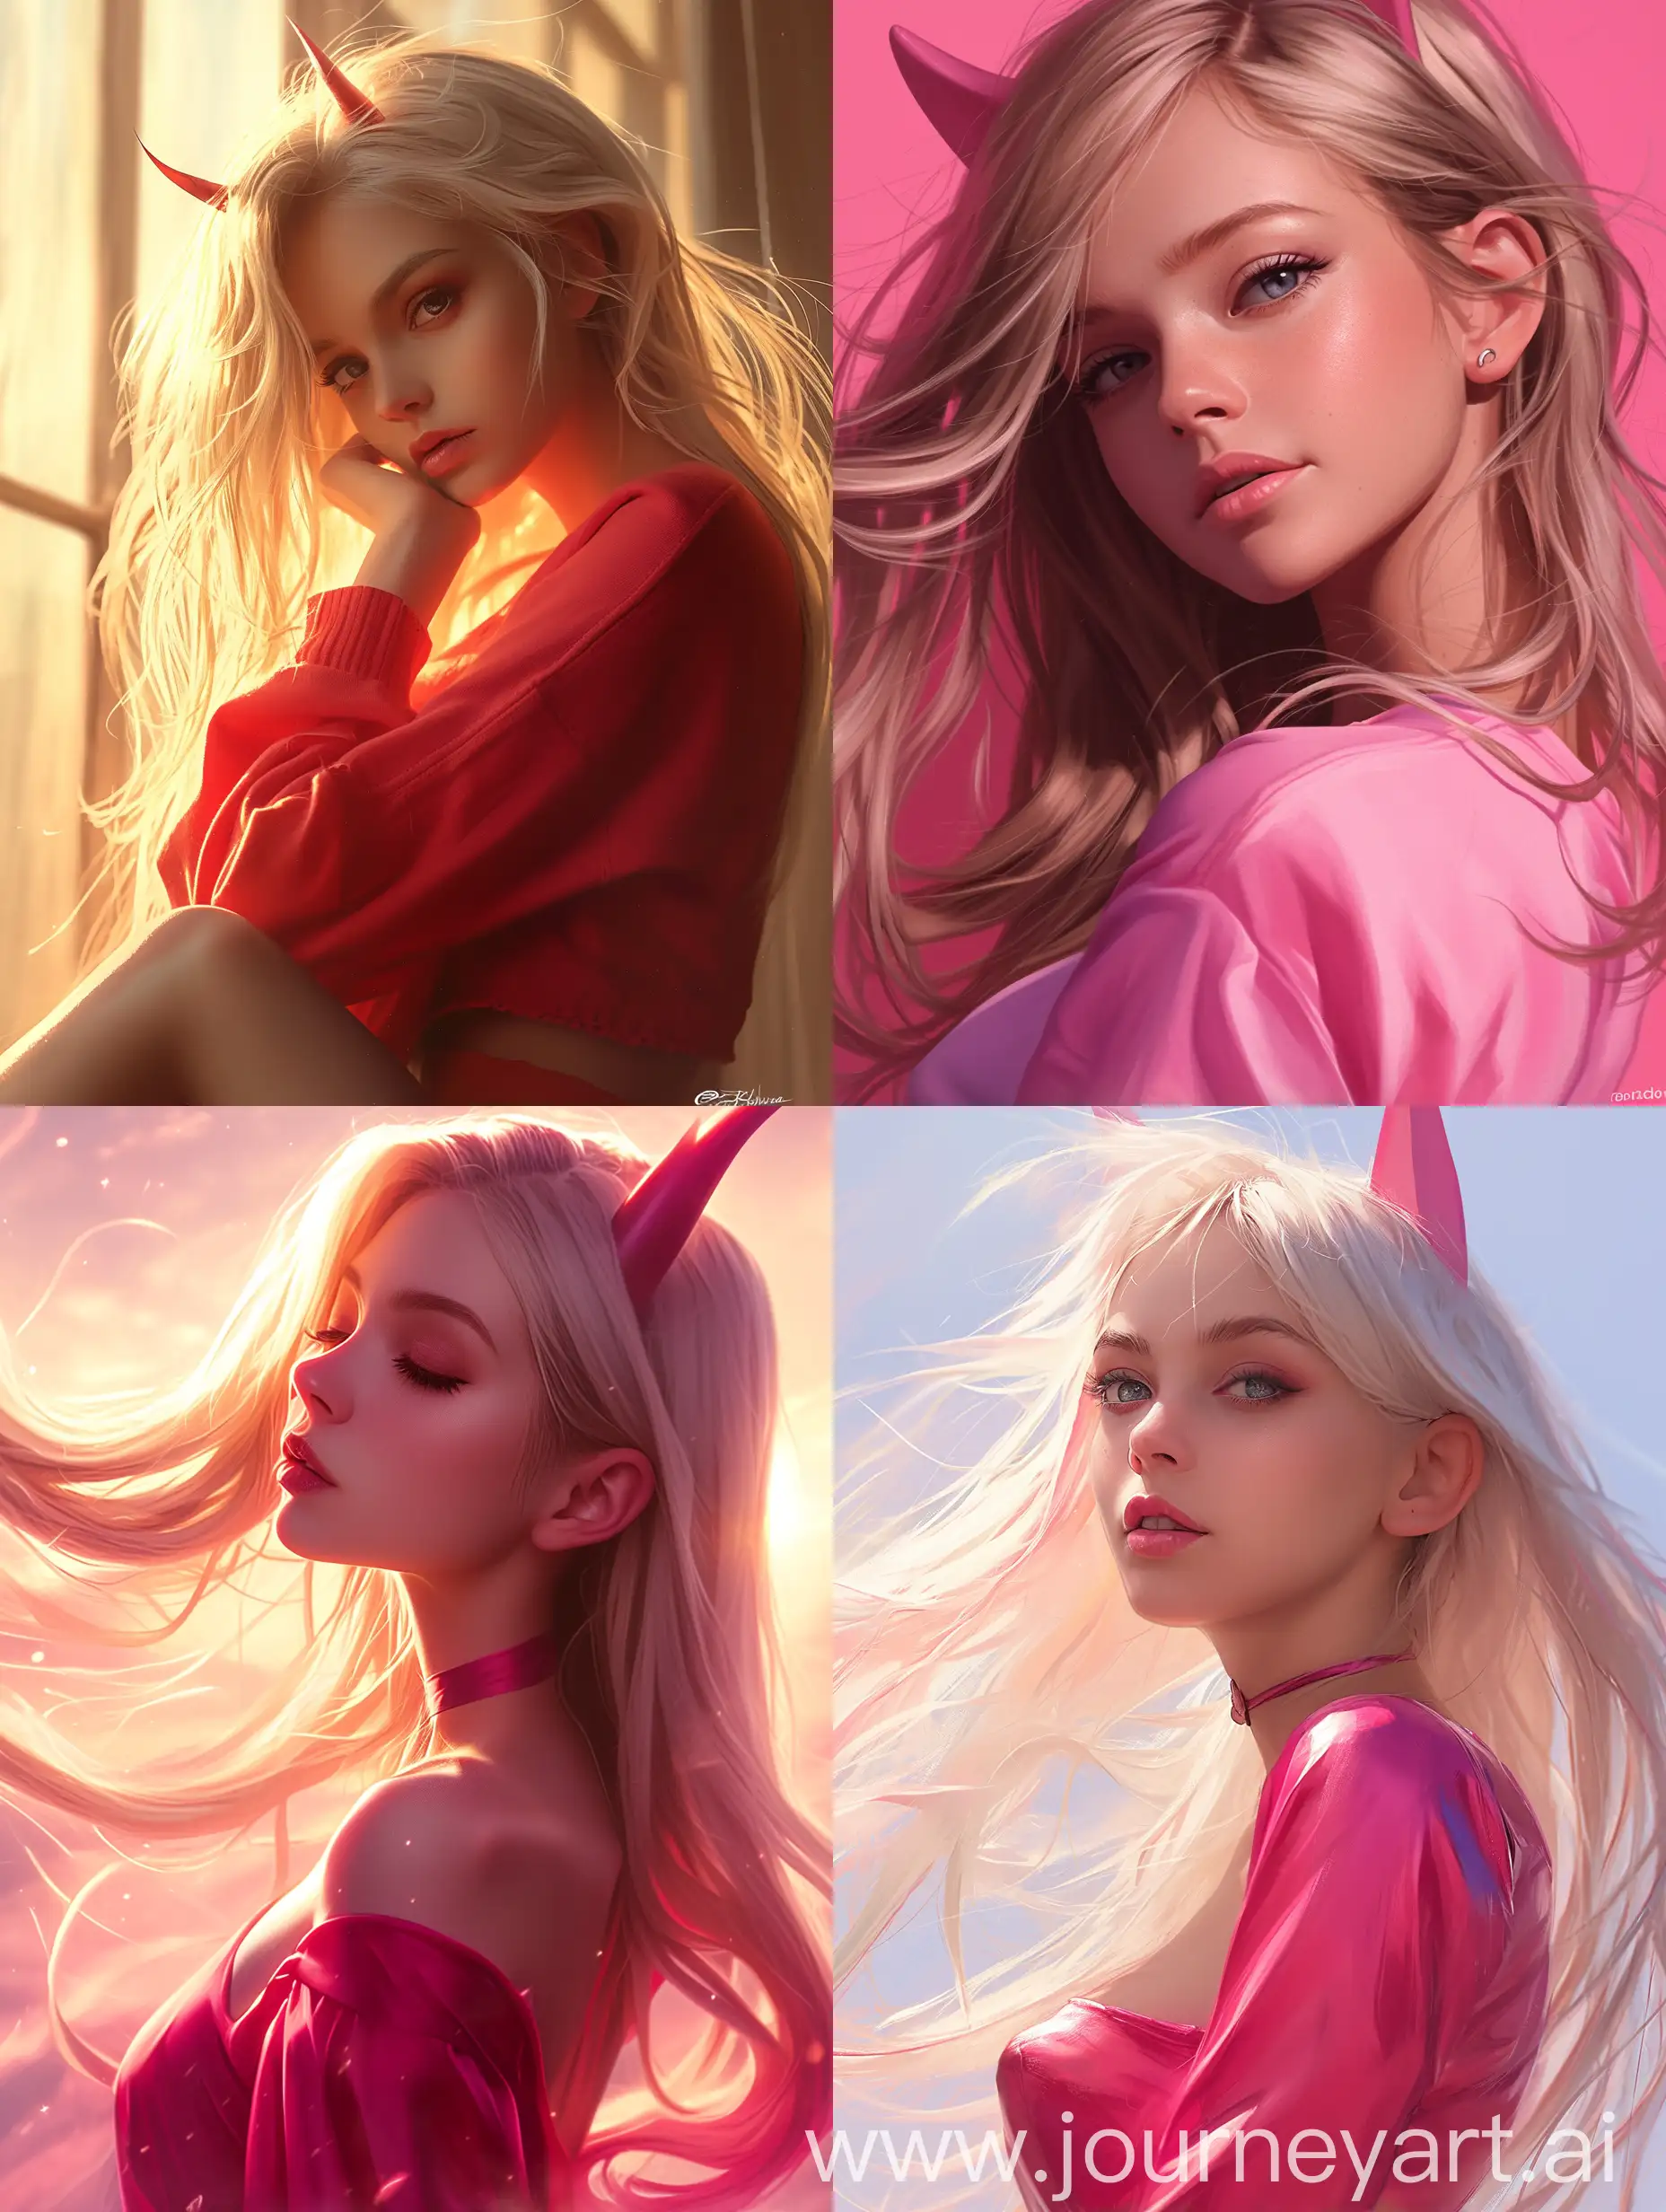 Realistic-Digital-Art-of-Power-with-Beautiful-Lighting-and-Flowy-Hair